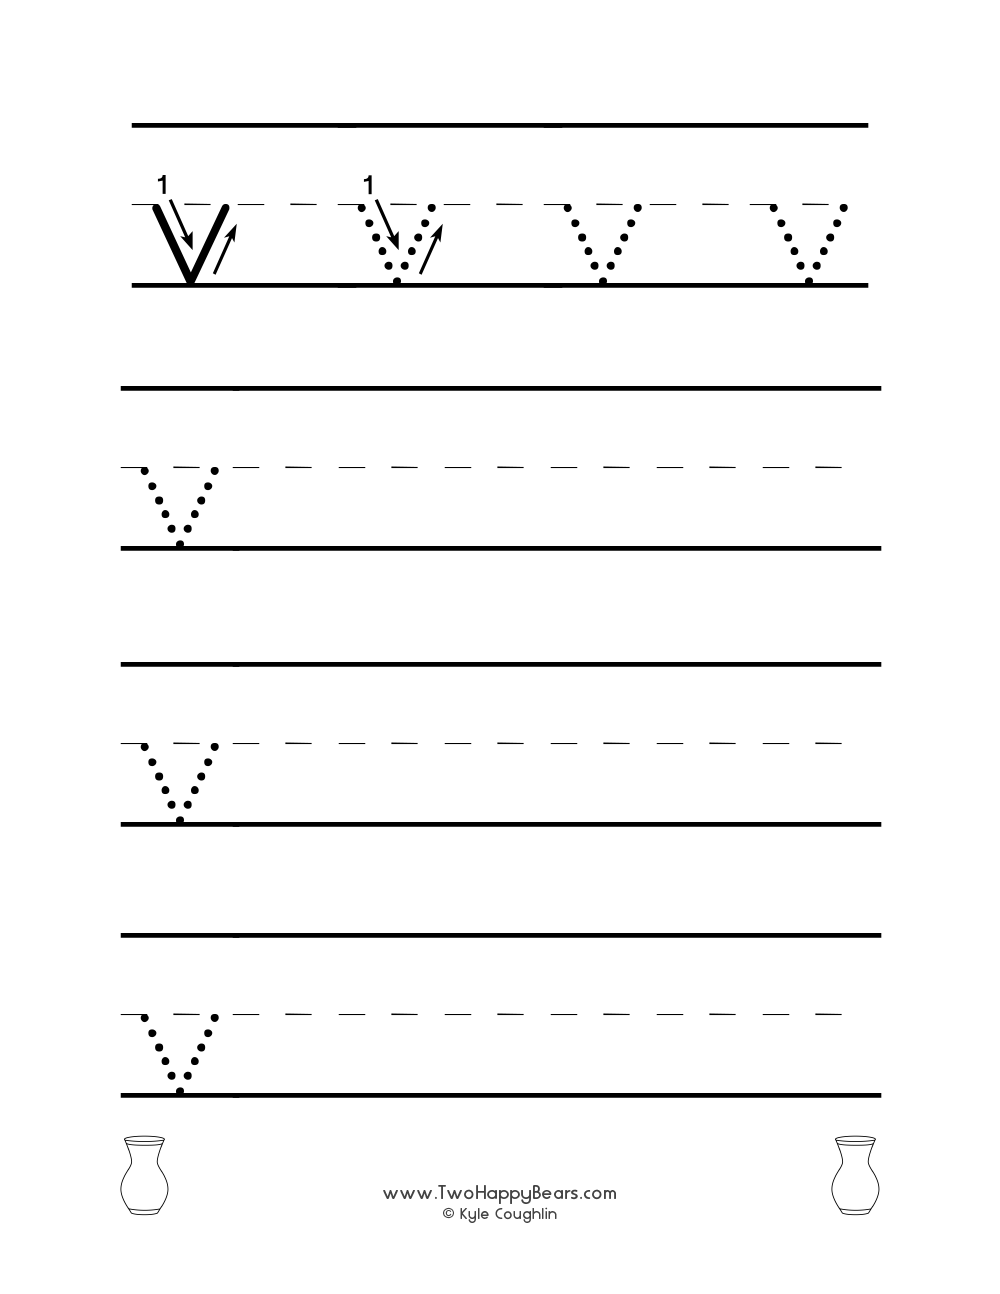 Lowercase letter V worksheet for tracing and drawing